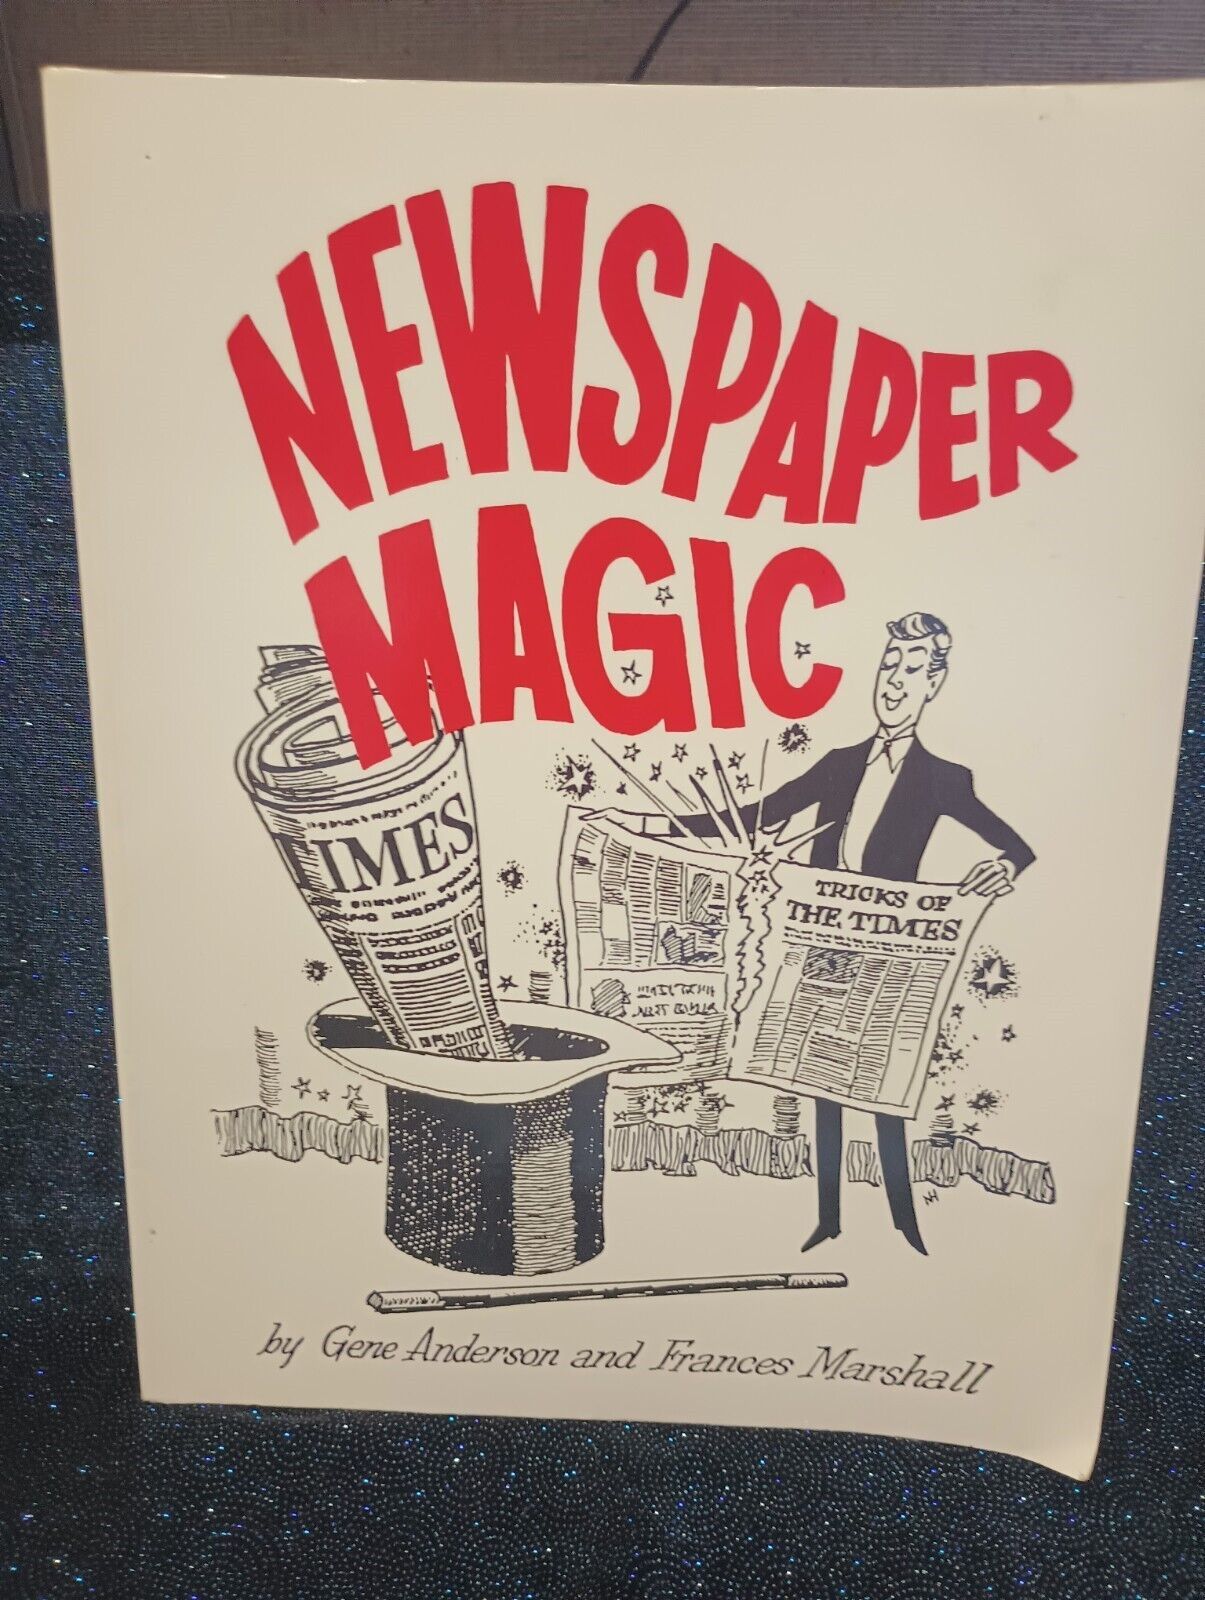 Newspaper of Magic Book by Gene Anderson 